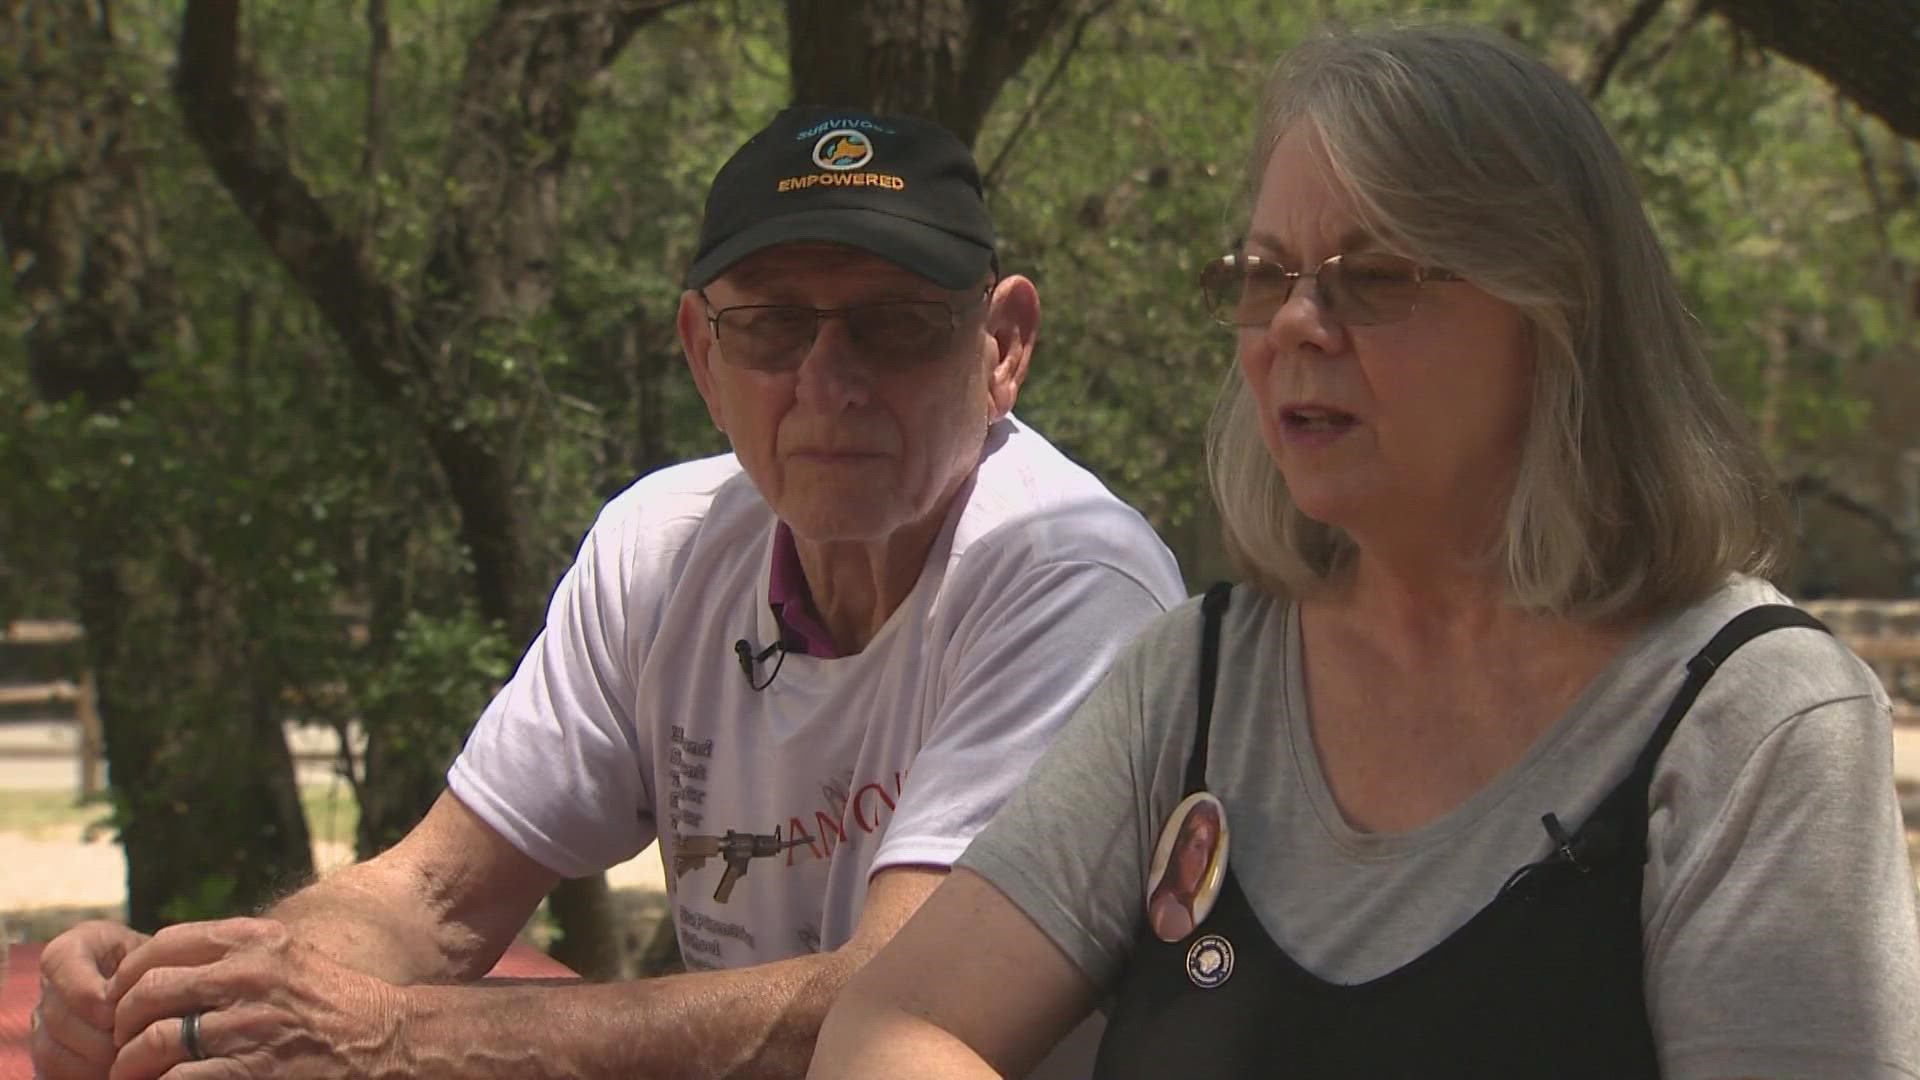 Sandy and Lonnie Phillips know the pain of losing a child in a mass shooting. Since losing their daughter in 2012, they have committed to supporting other survivors.